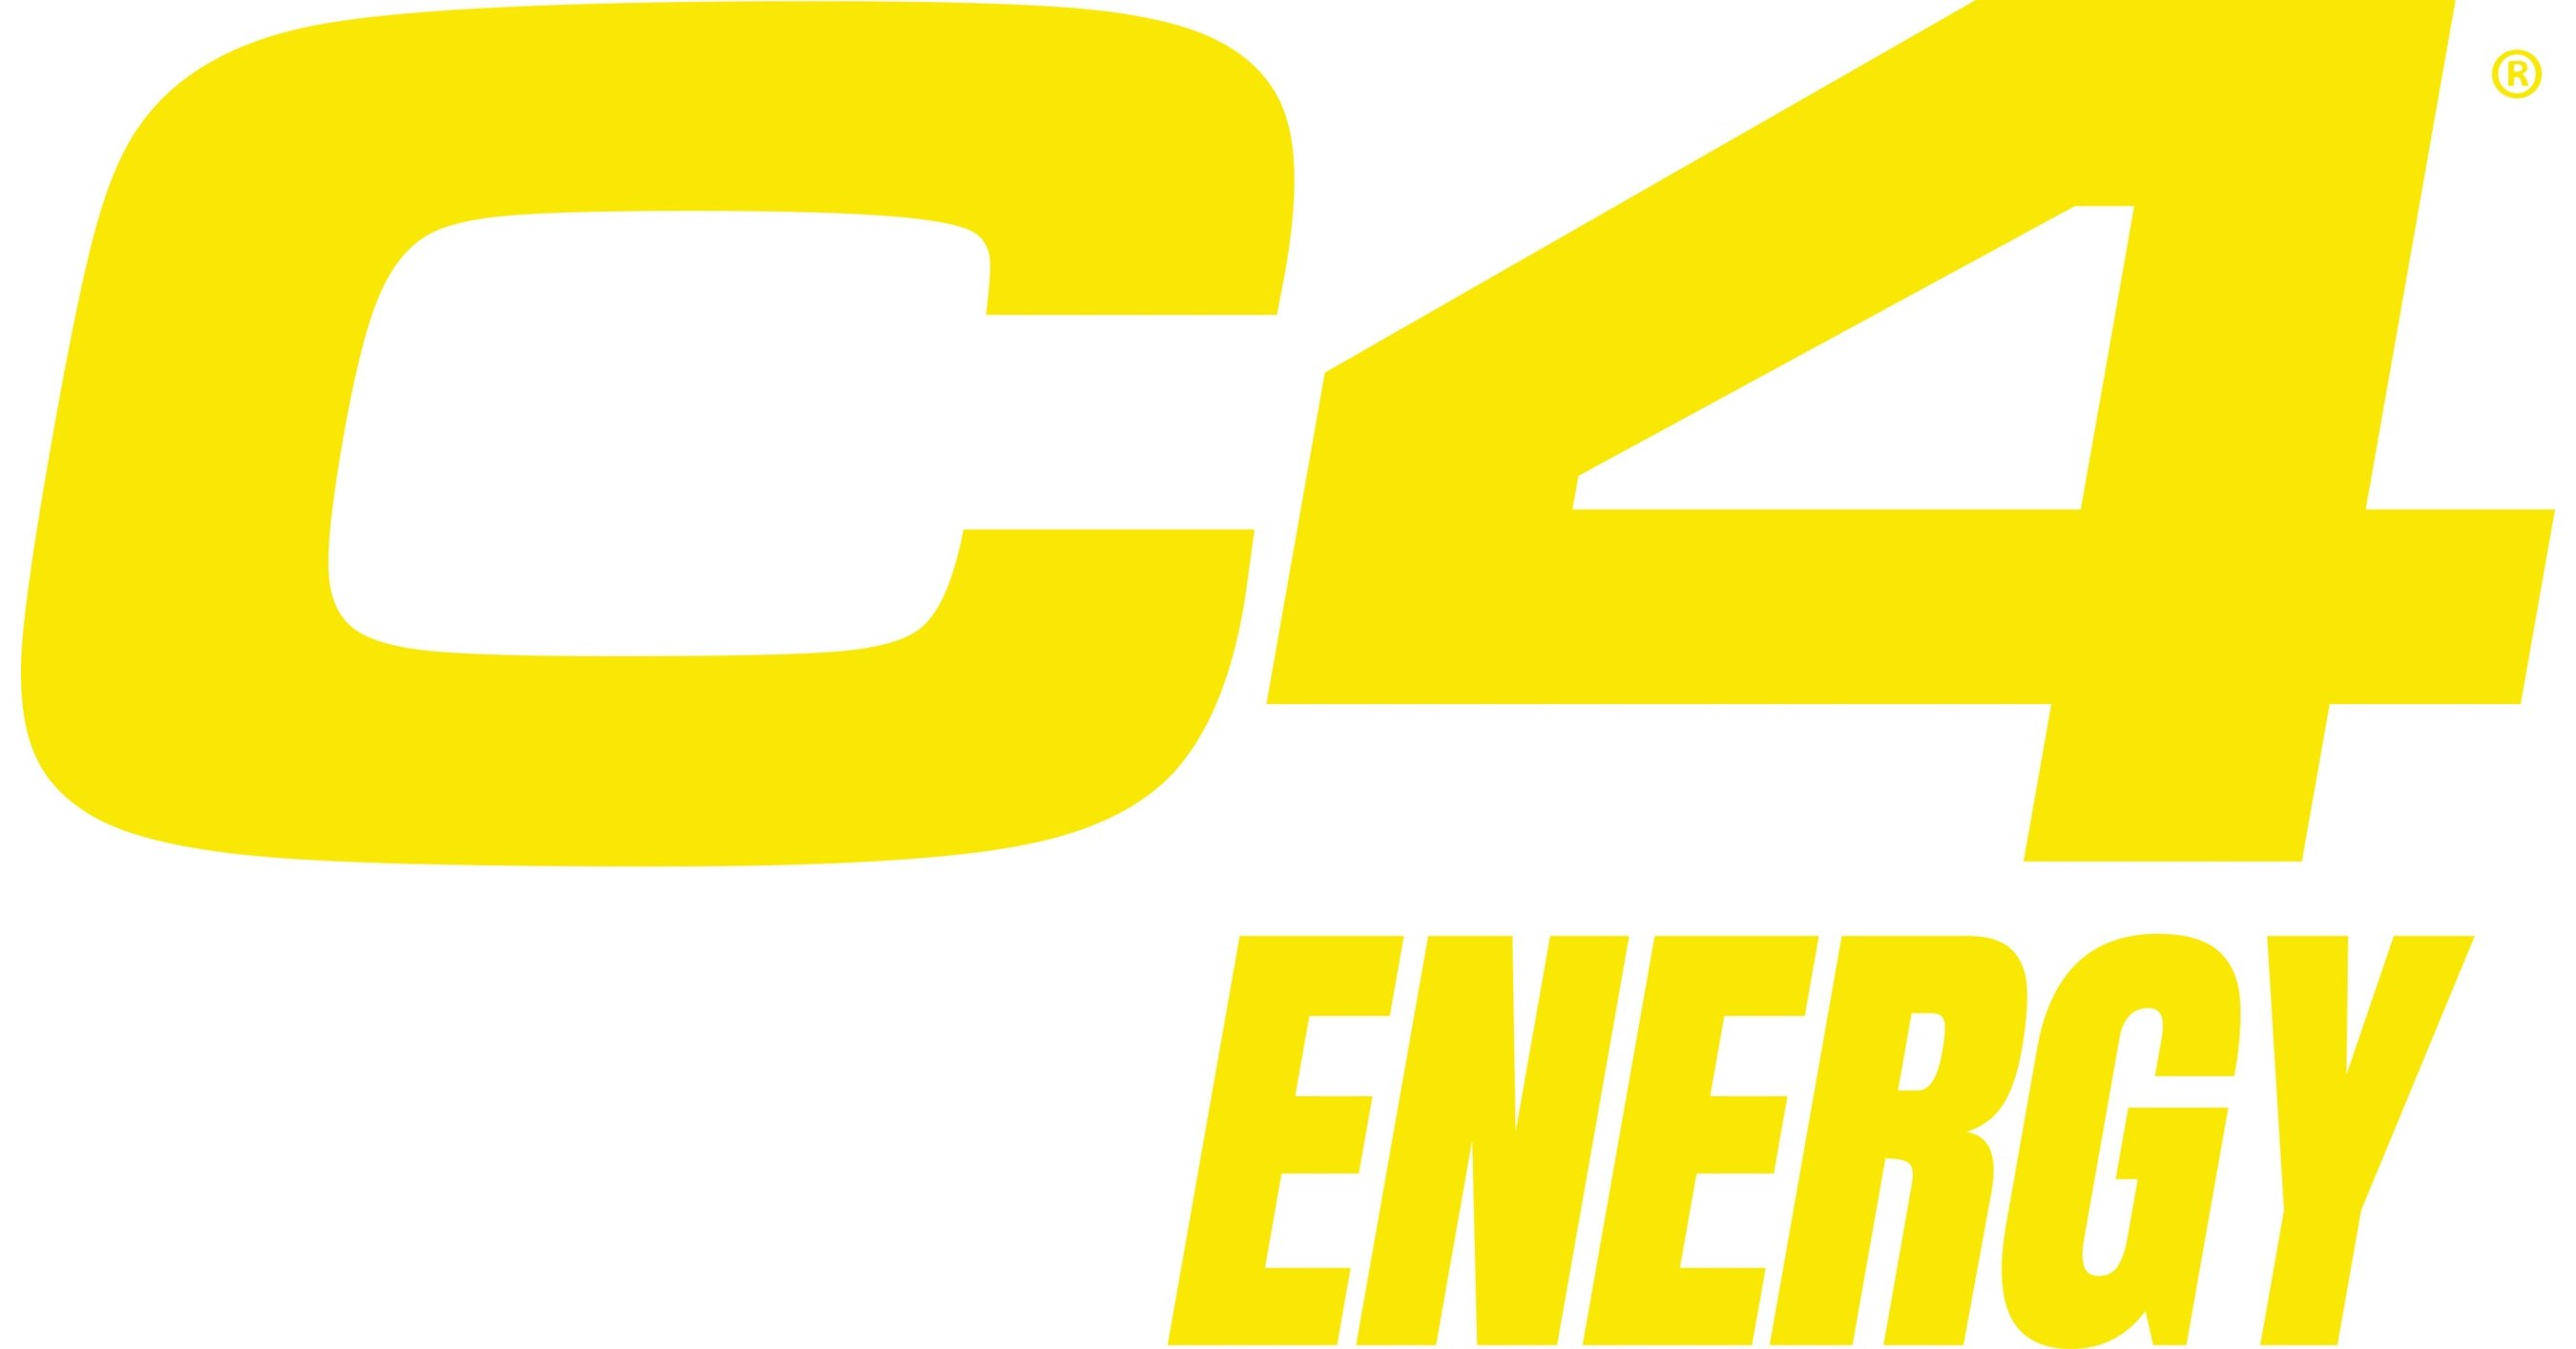 C4 Smart Energy® Summer Sipping Variety Pack – Cellucor